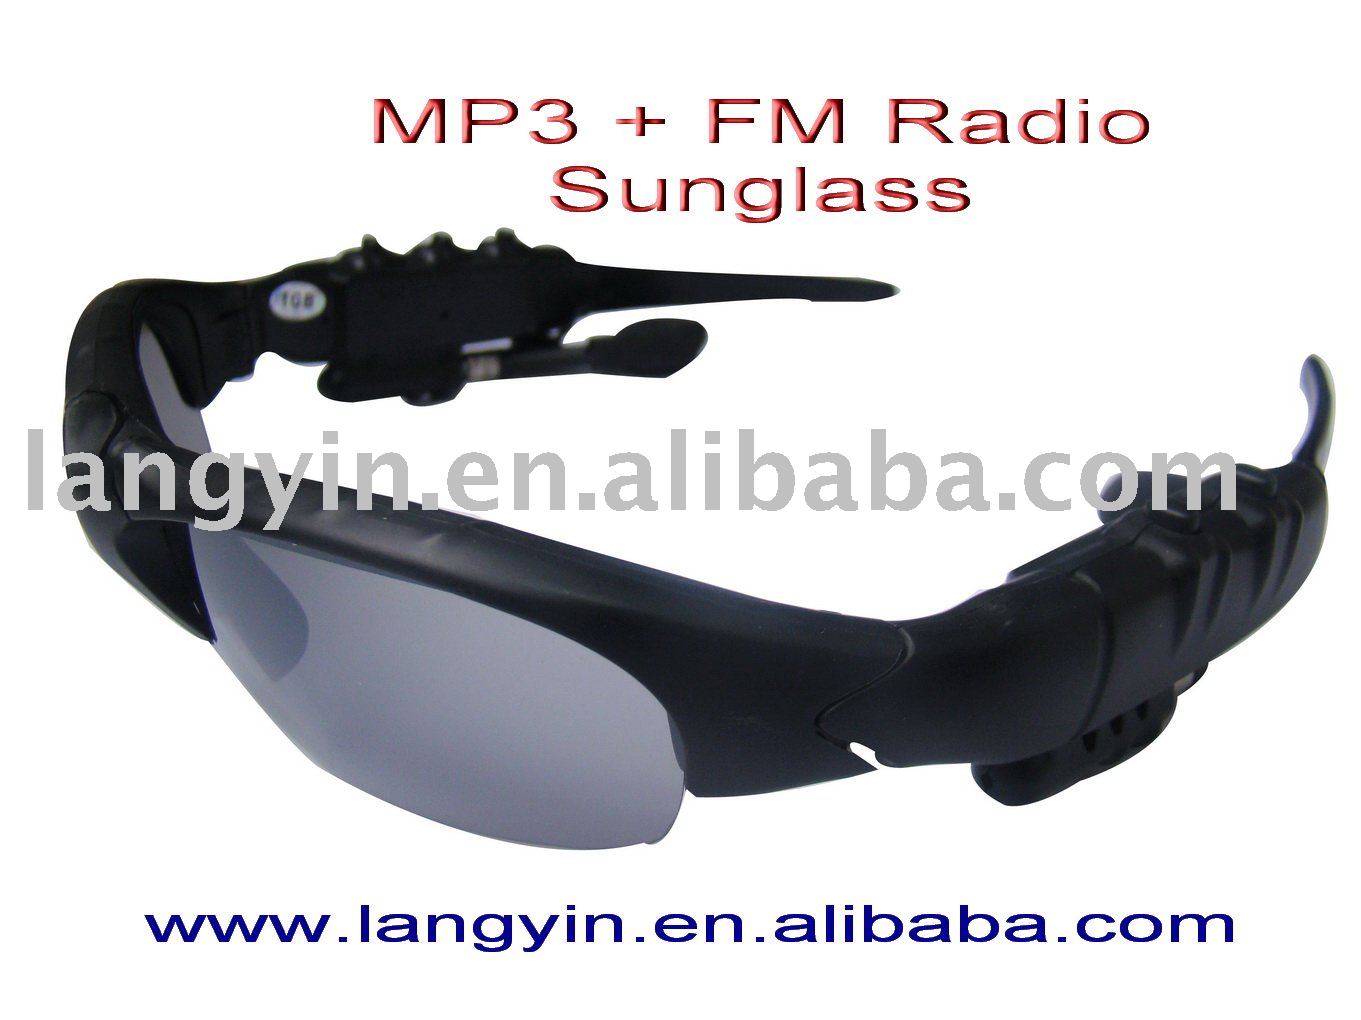  Radio on Fm Radio Function Sunglasses With Mp3 Player  Th468  Products  Buy Fm